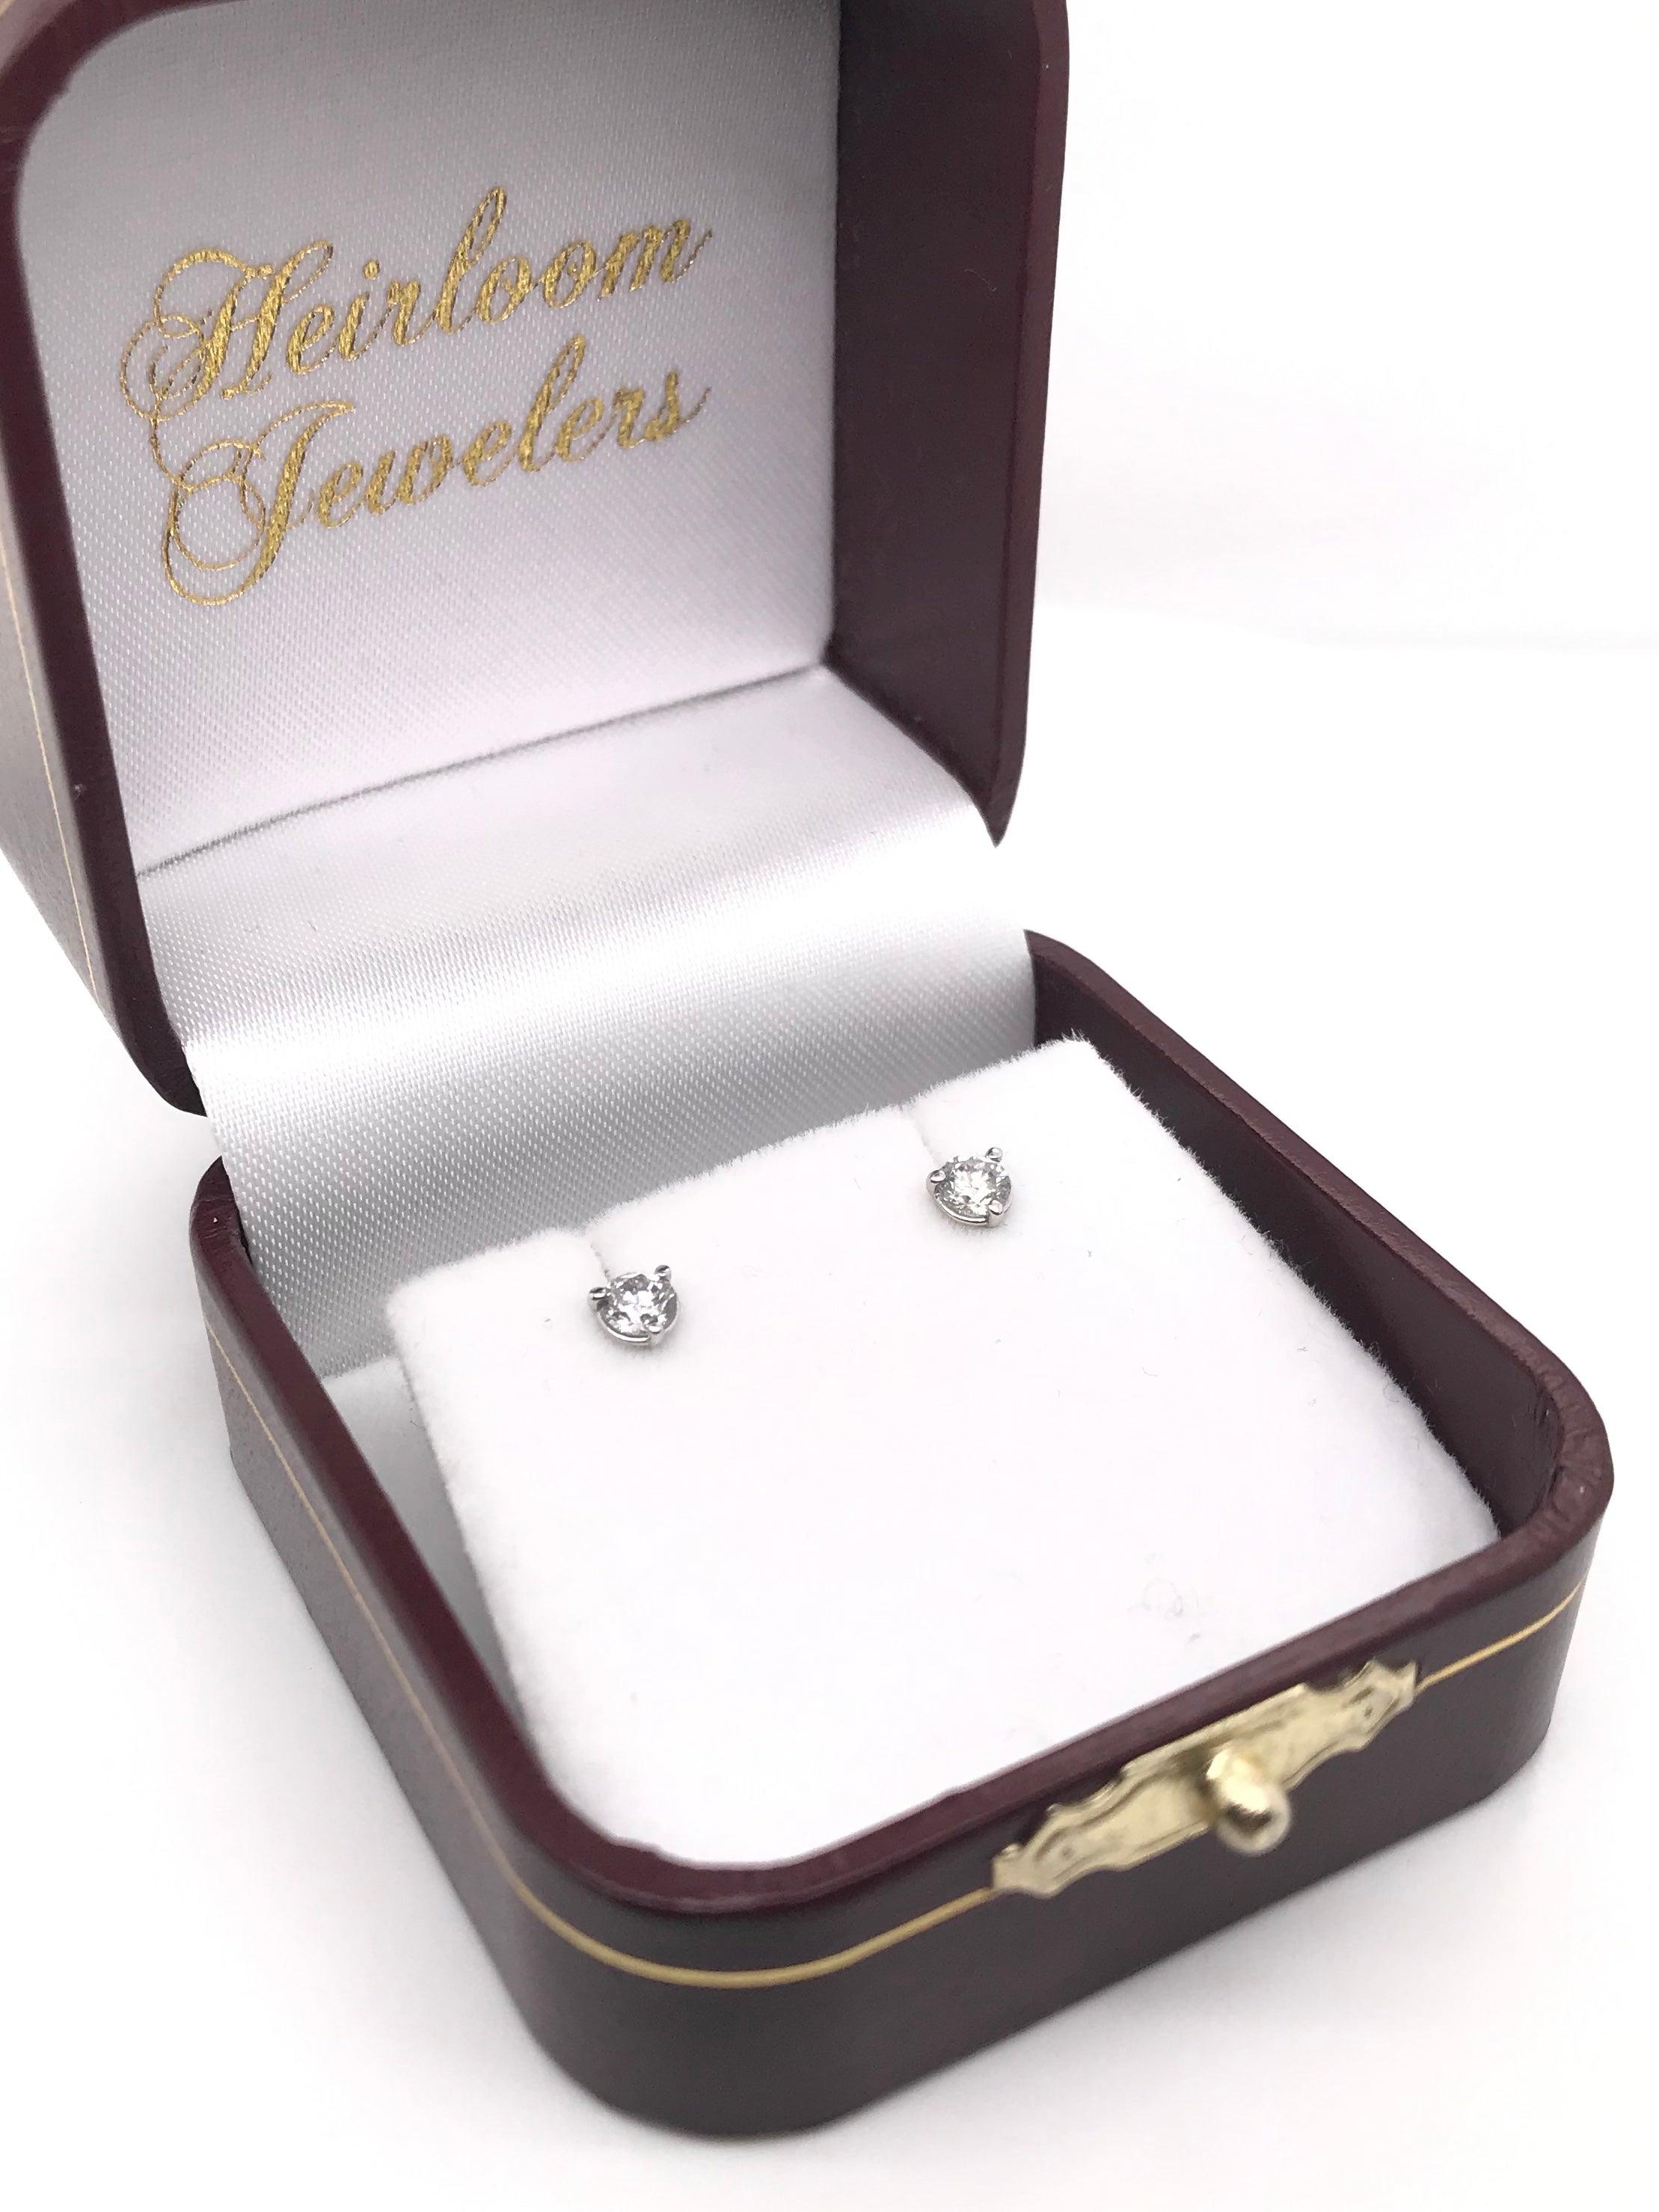 These contemporary style diamond earrings feature approximately 0.38 carats of diamonds; combined total weight. The settings are 14k white gold and are 